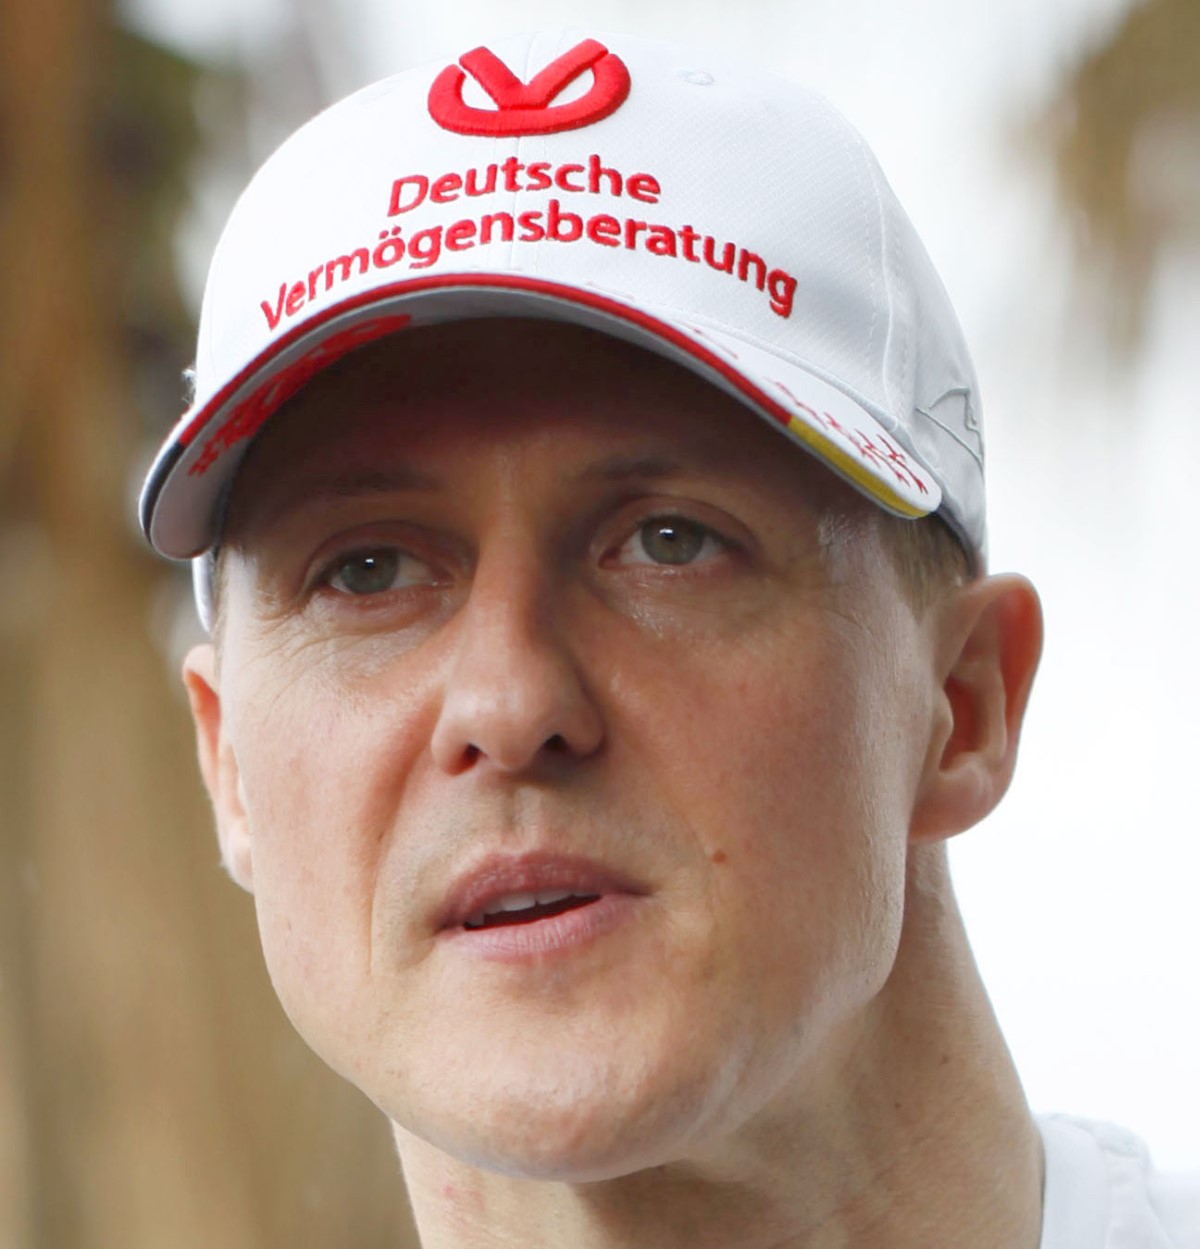 Anyone who says they know how Schumacher is doing is likely blowing smoke up your posterior